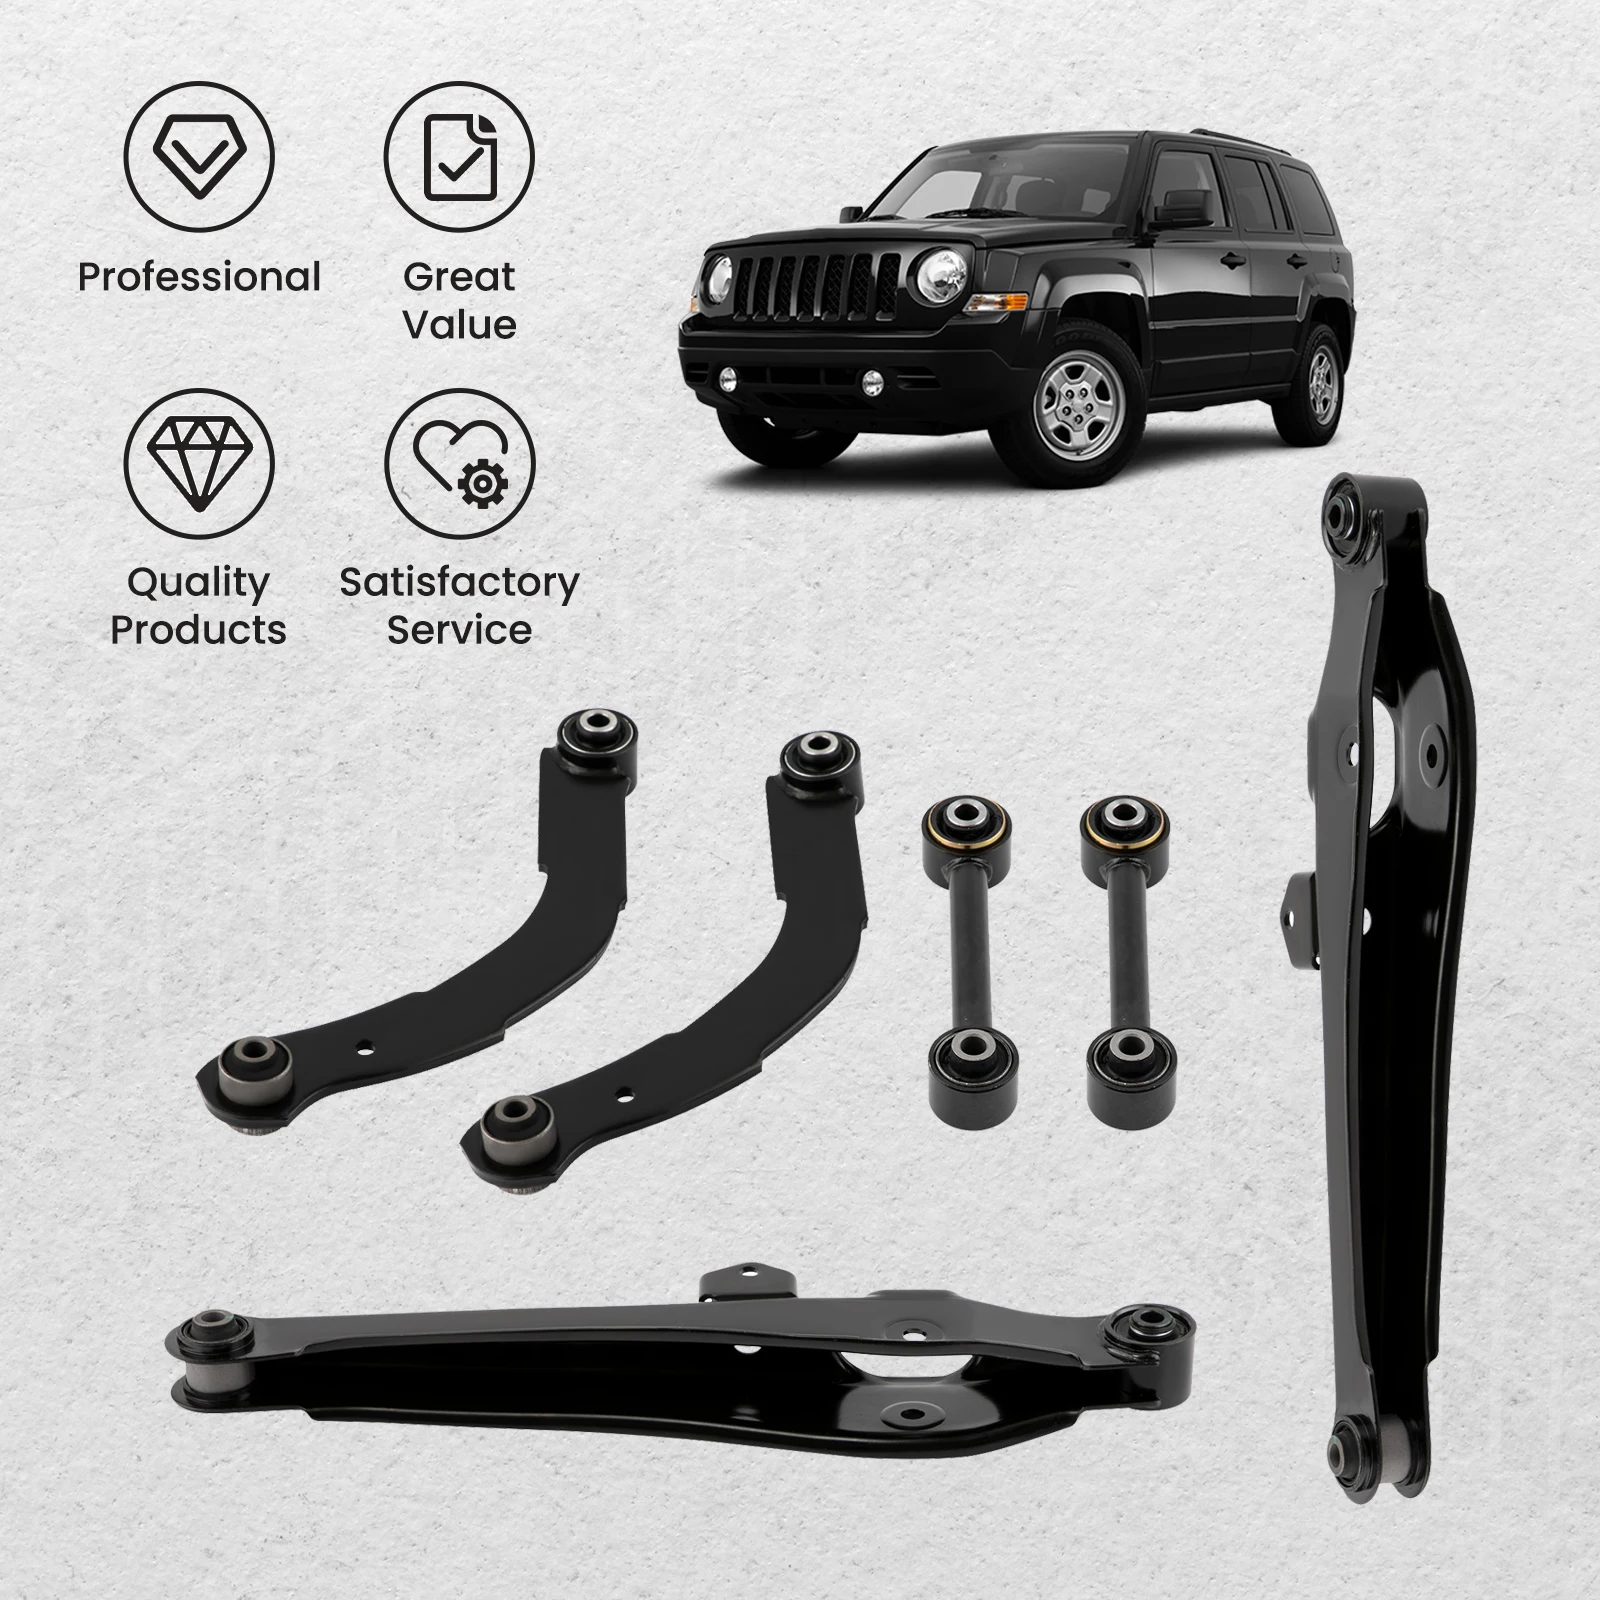 

6pcs Rear Upper & Lower Control Arms Rearward Lateral Toe Arm for Caliber 07-12 for Jeep Compass Patriot 2007-17